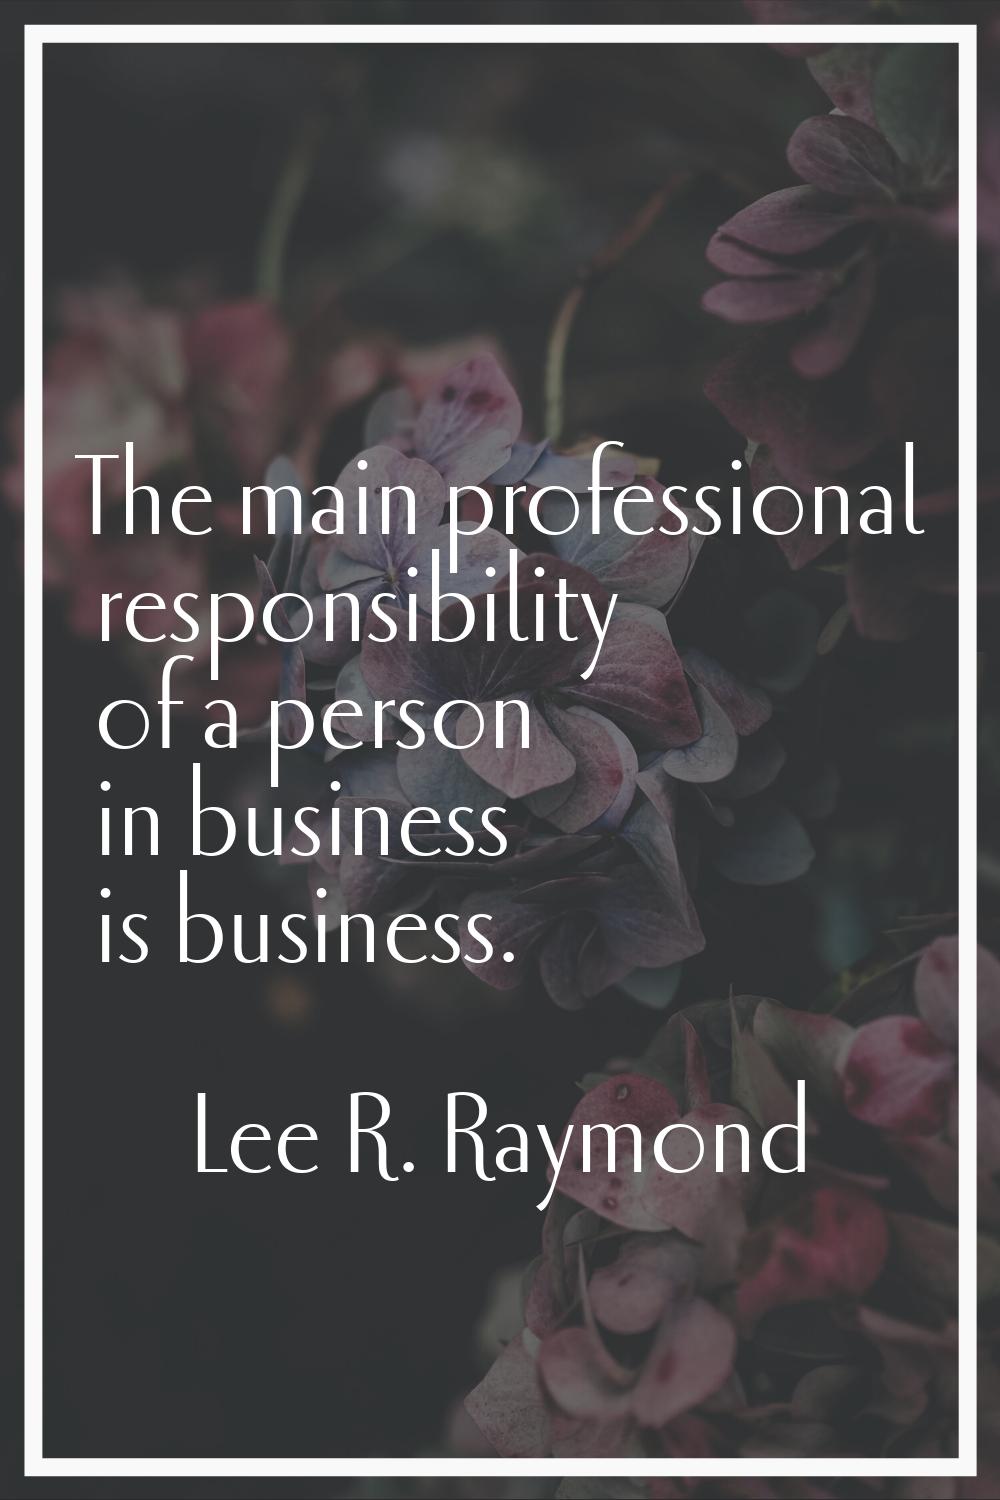 The main professional responsibility of a person in business is business.